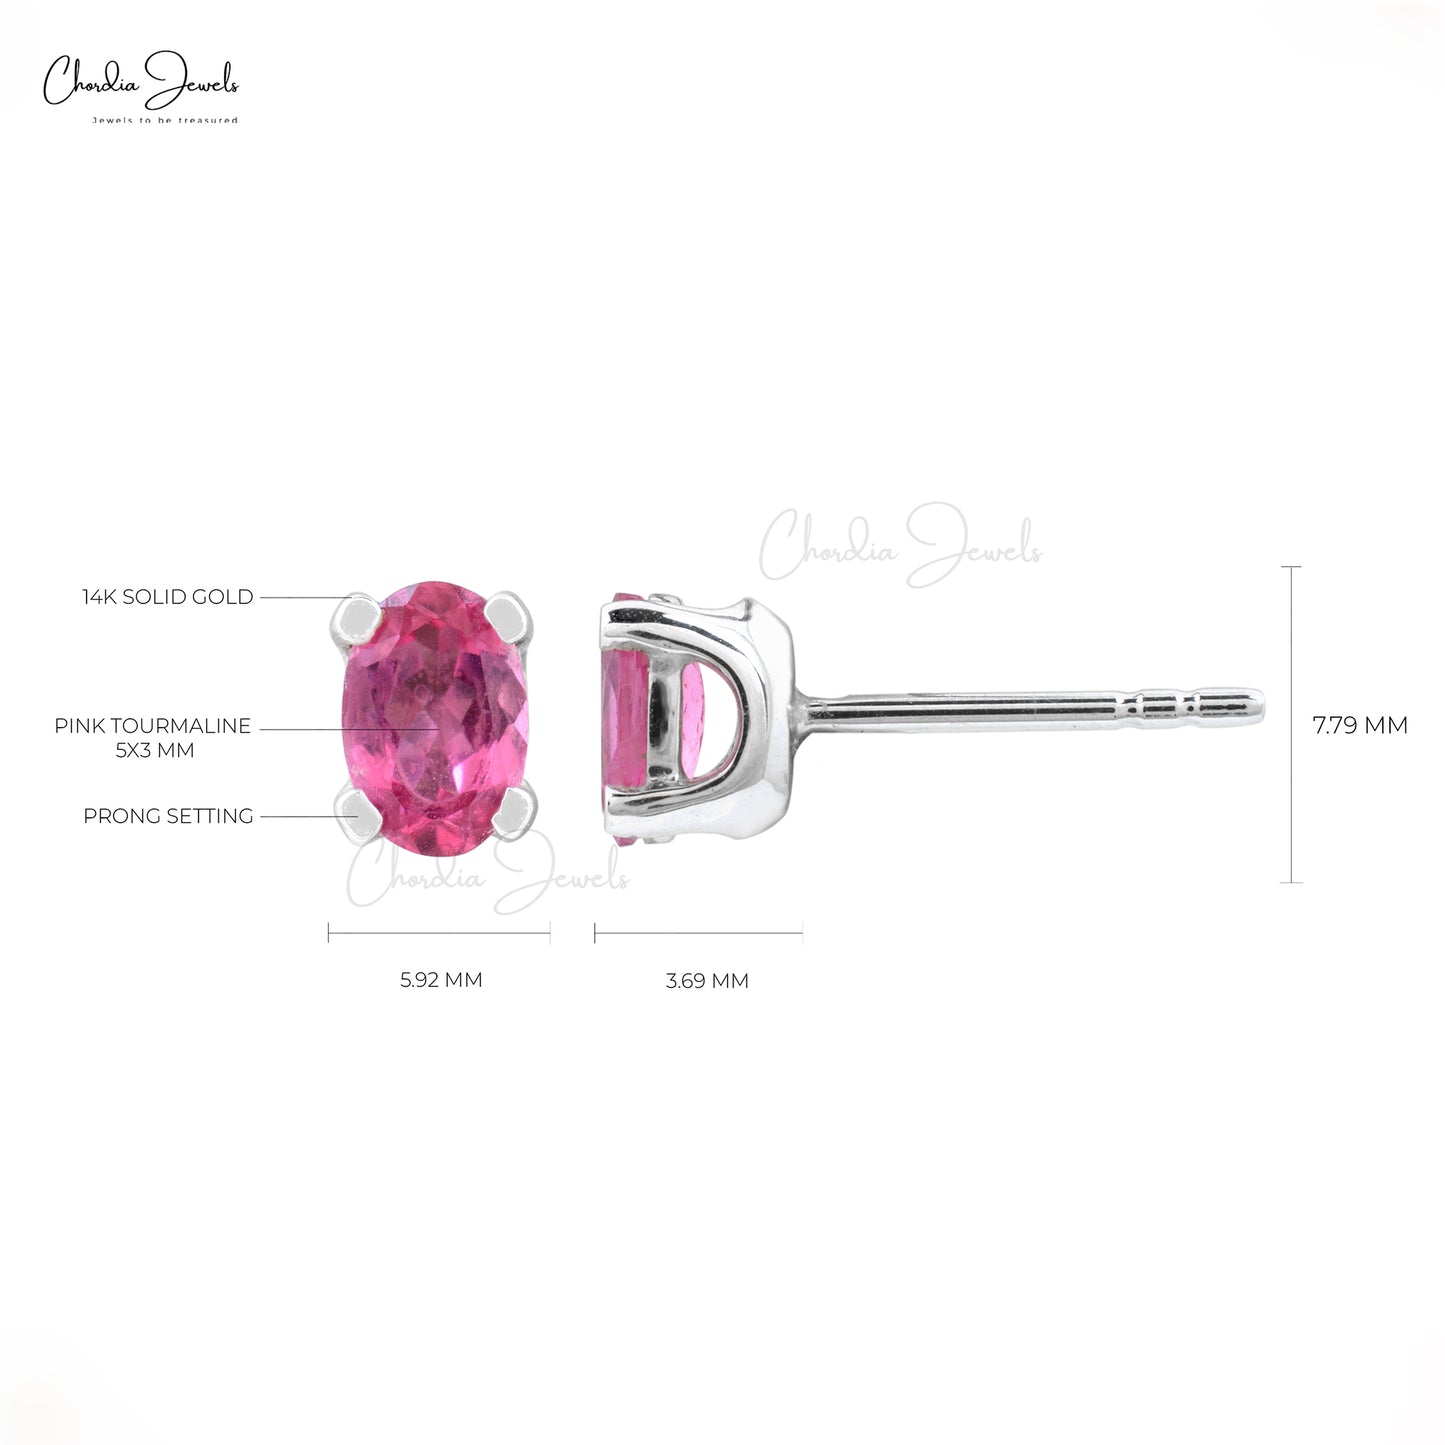 Load image into Gallery viewer, Natural Pink Tourmaline Earrings 14k Solid White Gold Solitaire Earrings 0.88 Carats Oval Cut Gemstone Studs For Her
